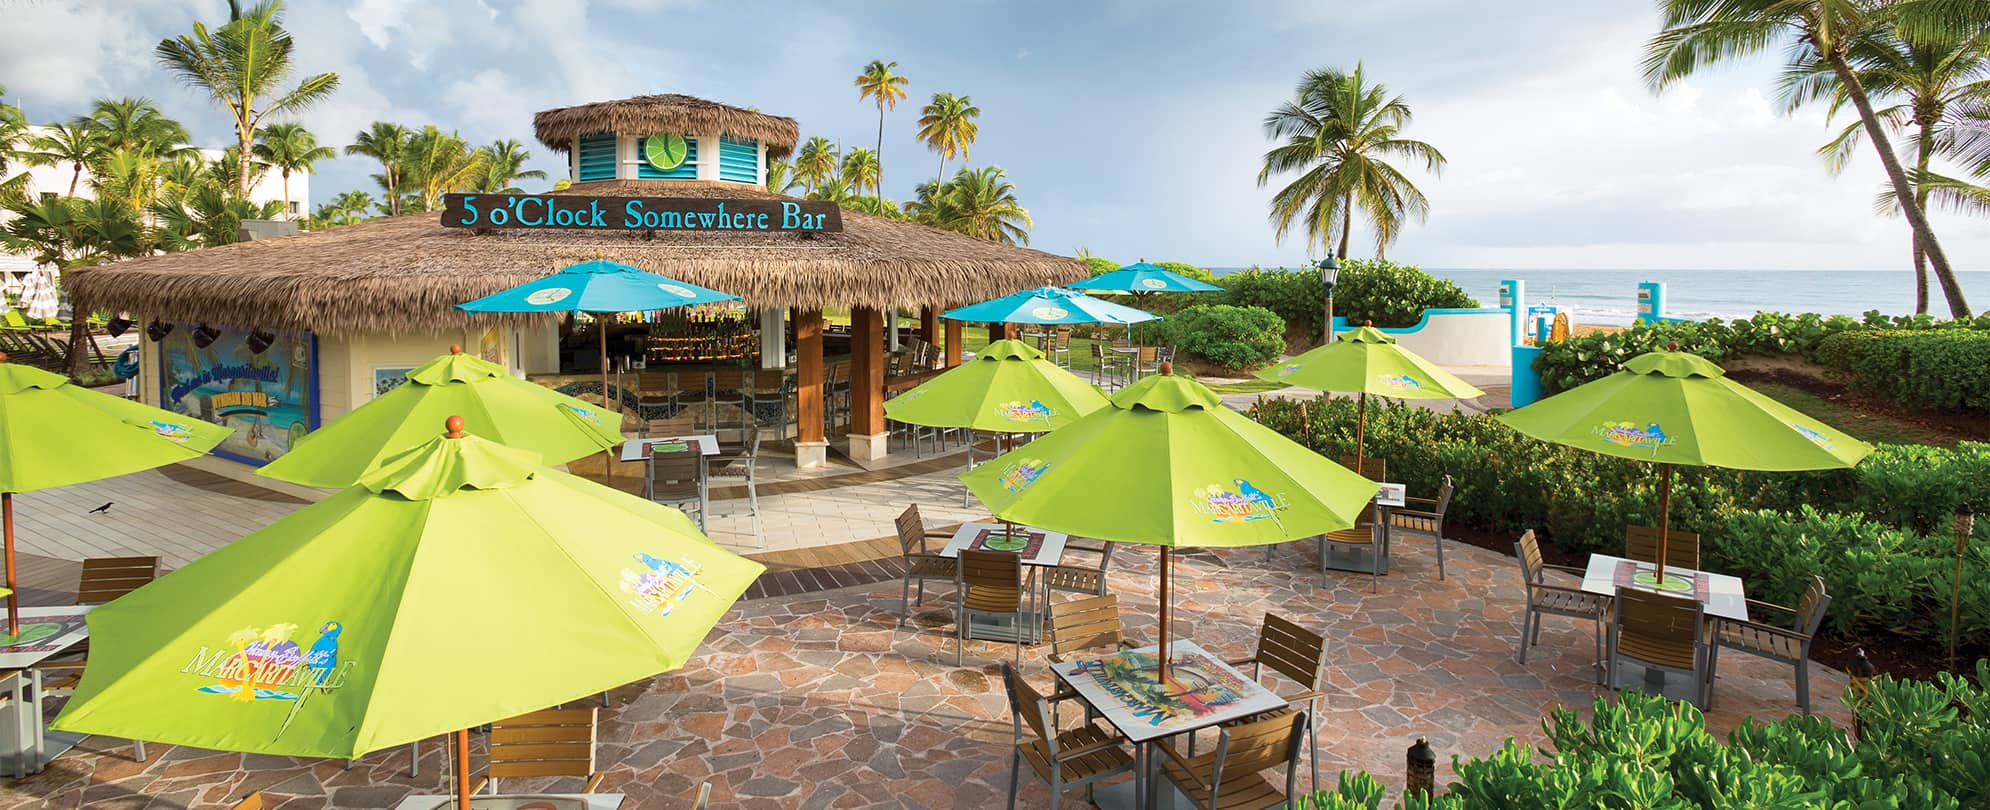 The "5 o'Clock Somewhere Bar" and tables with umbrellas at Margaritaville Vacation Club by Wyndham - Rio Mar in Puerto Rico.